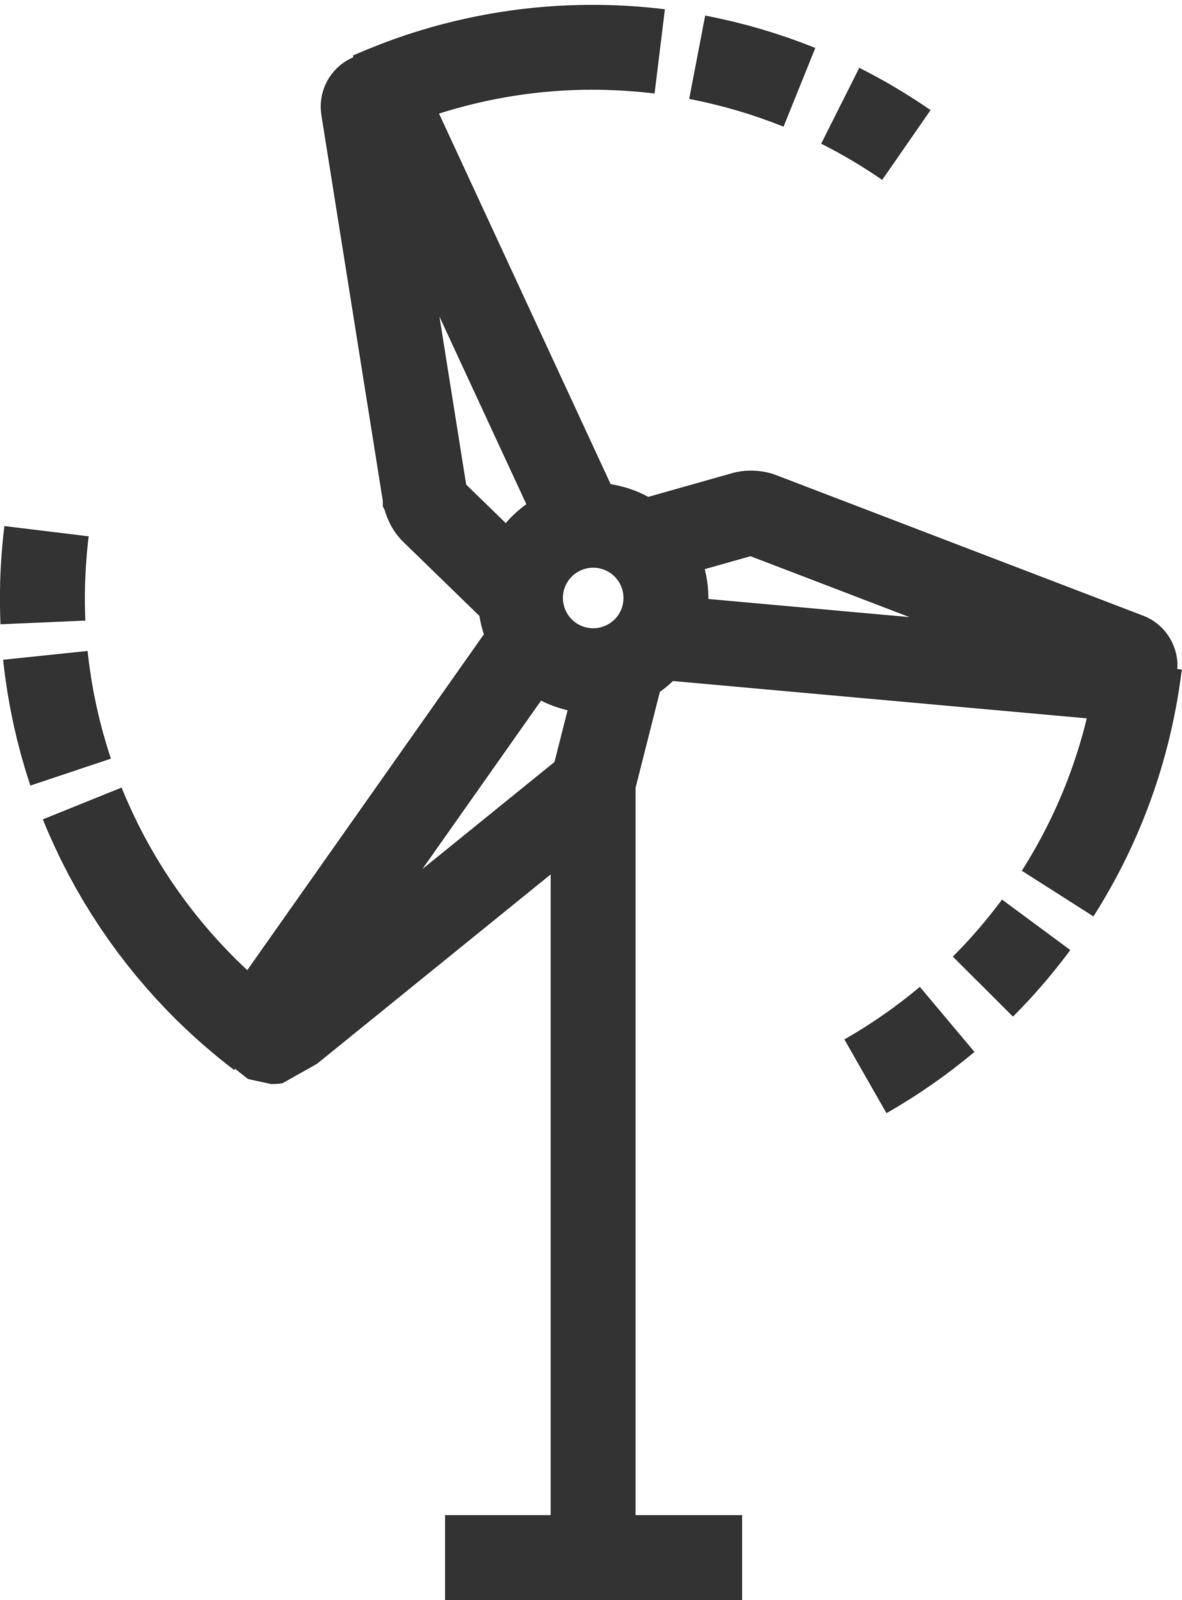 Wind turbine icon in thick outline style. Black and white monochrome vector illustration.